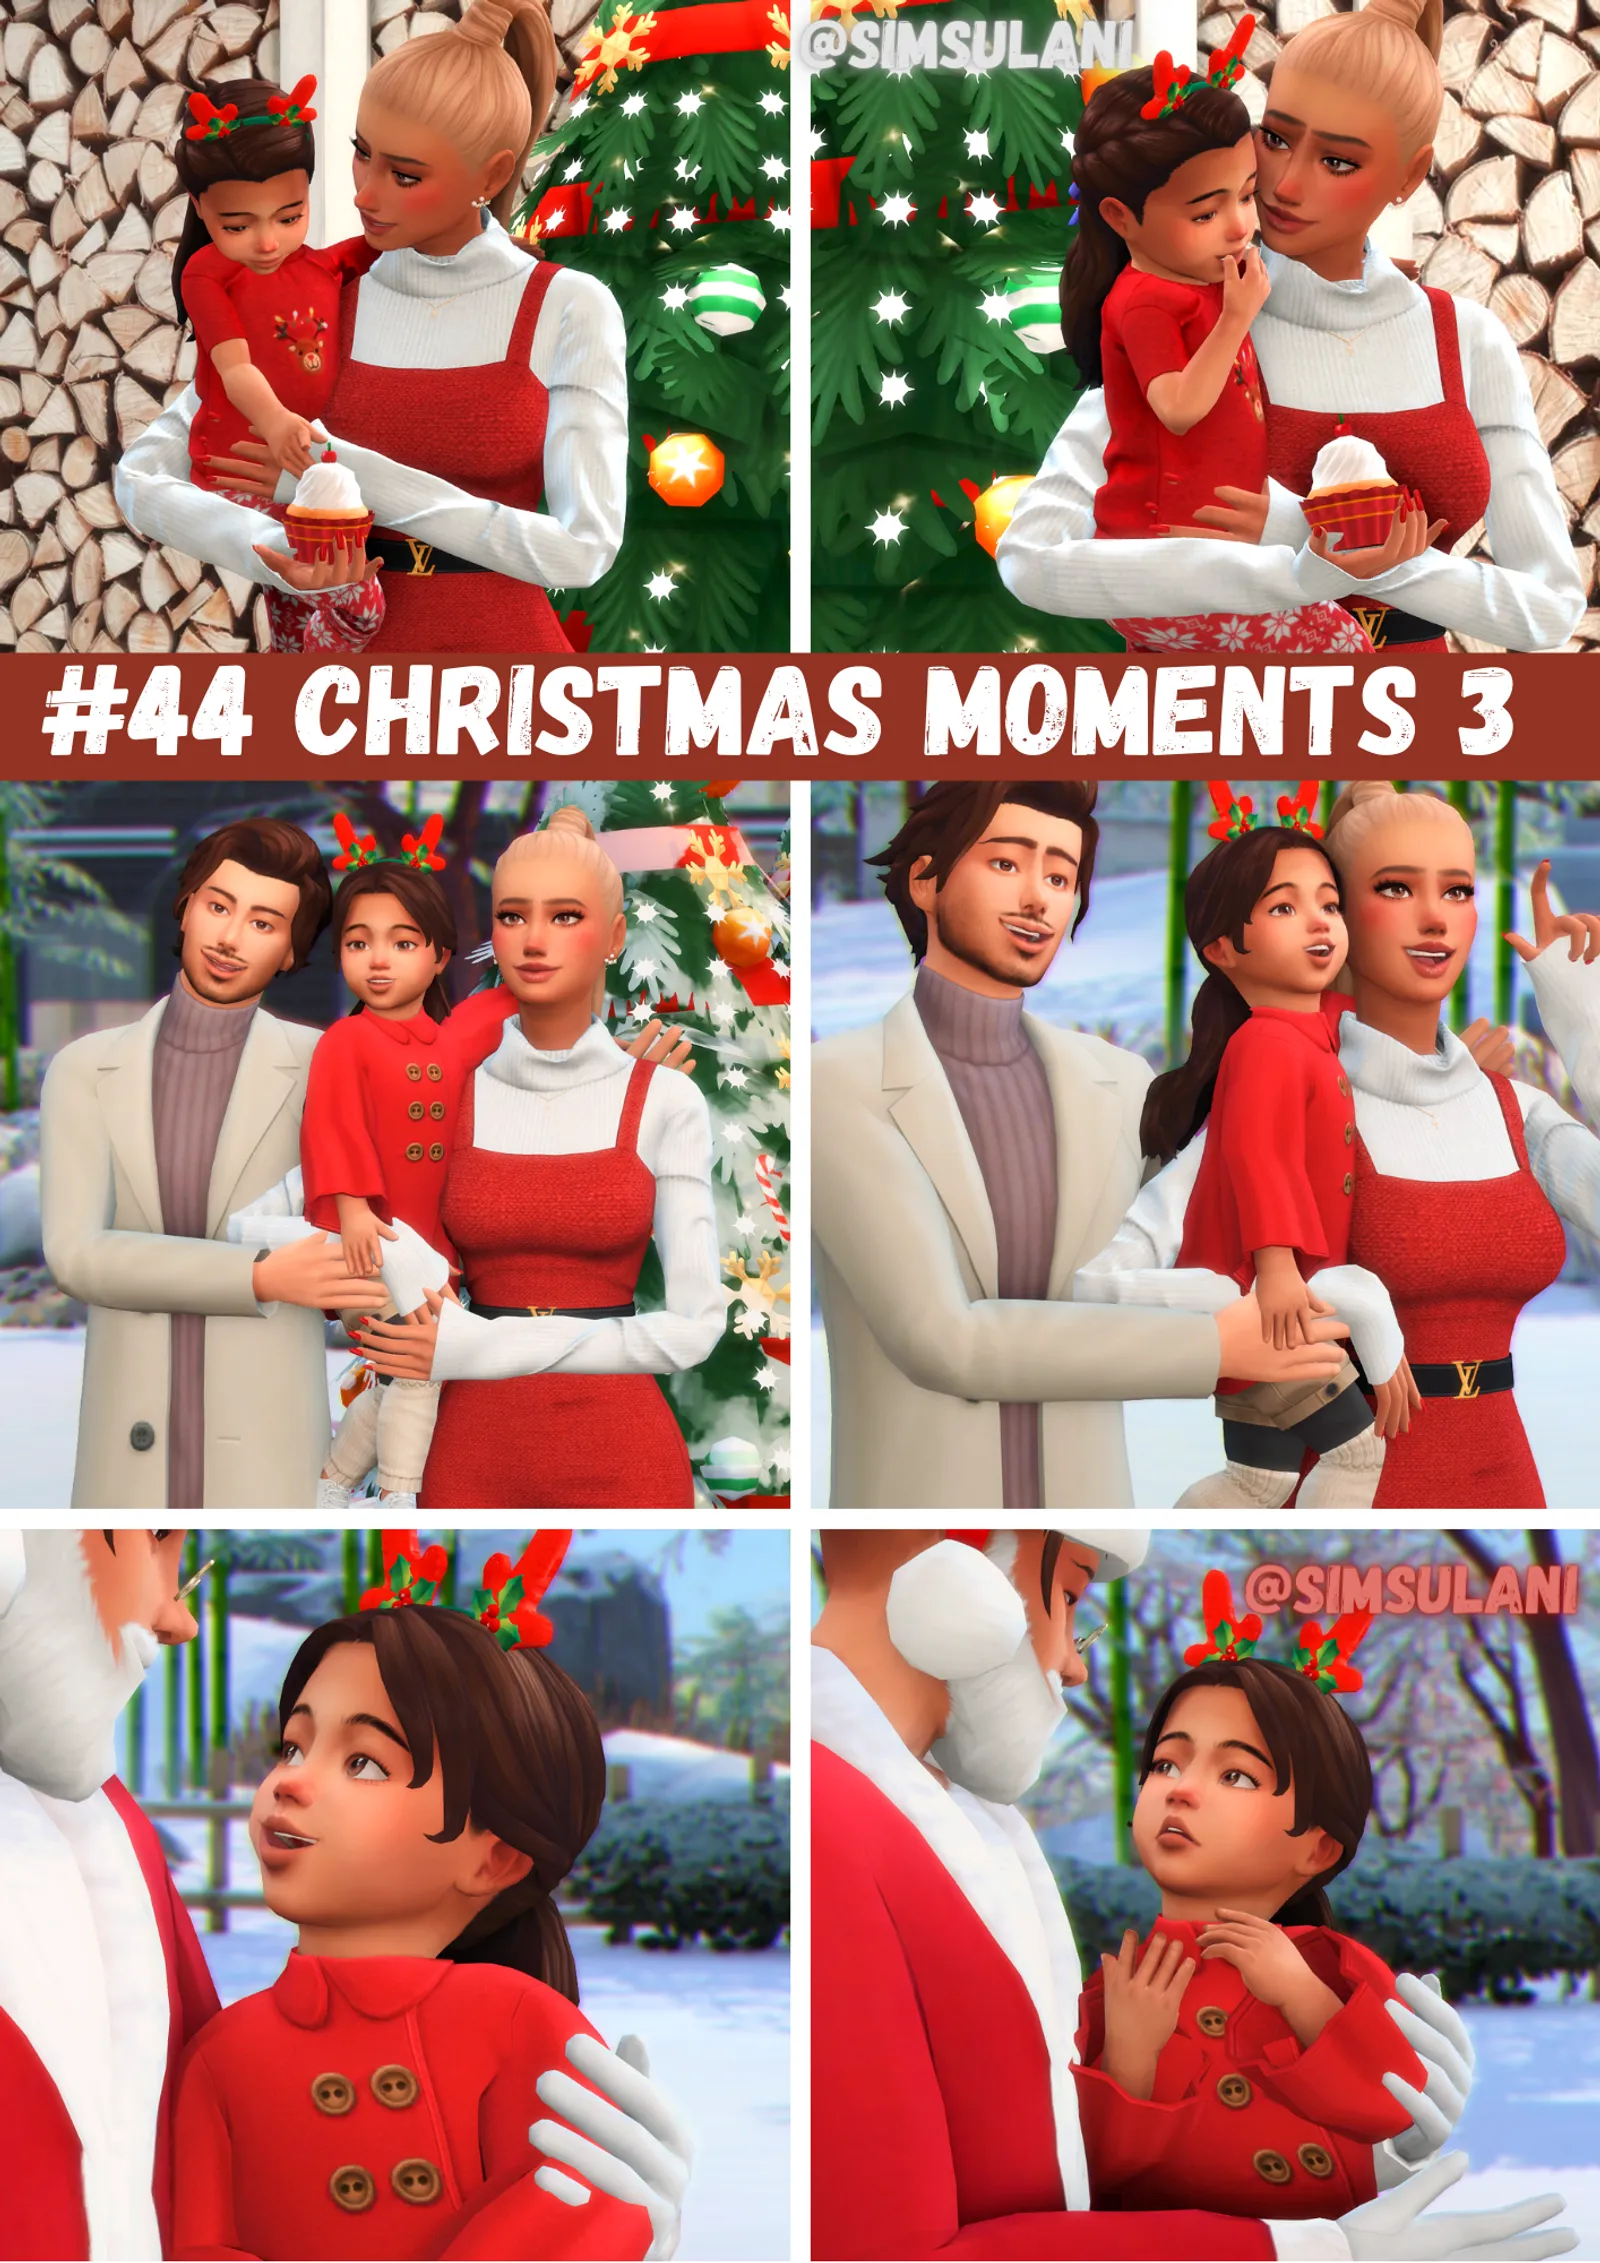 #44 Poses Pack Christmas Moments 3 